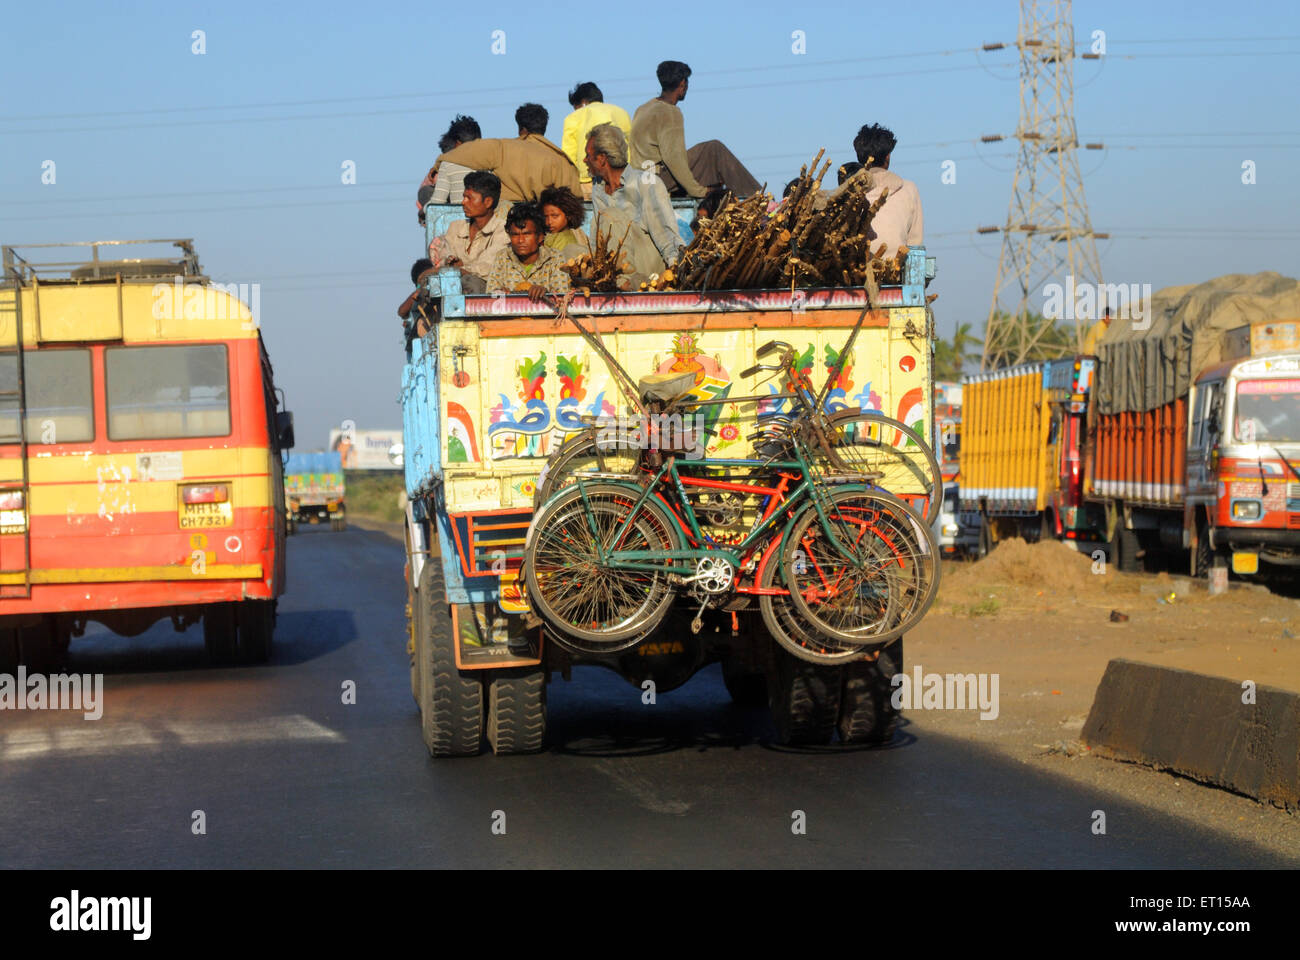 Truck on highway carrying passengers and bicycles hanging Stock Photo